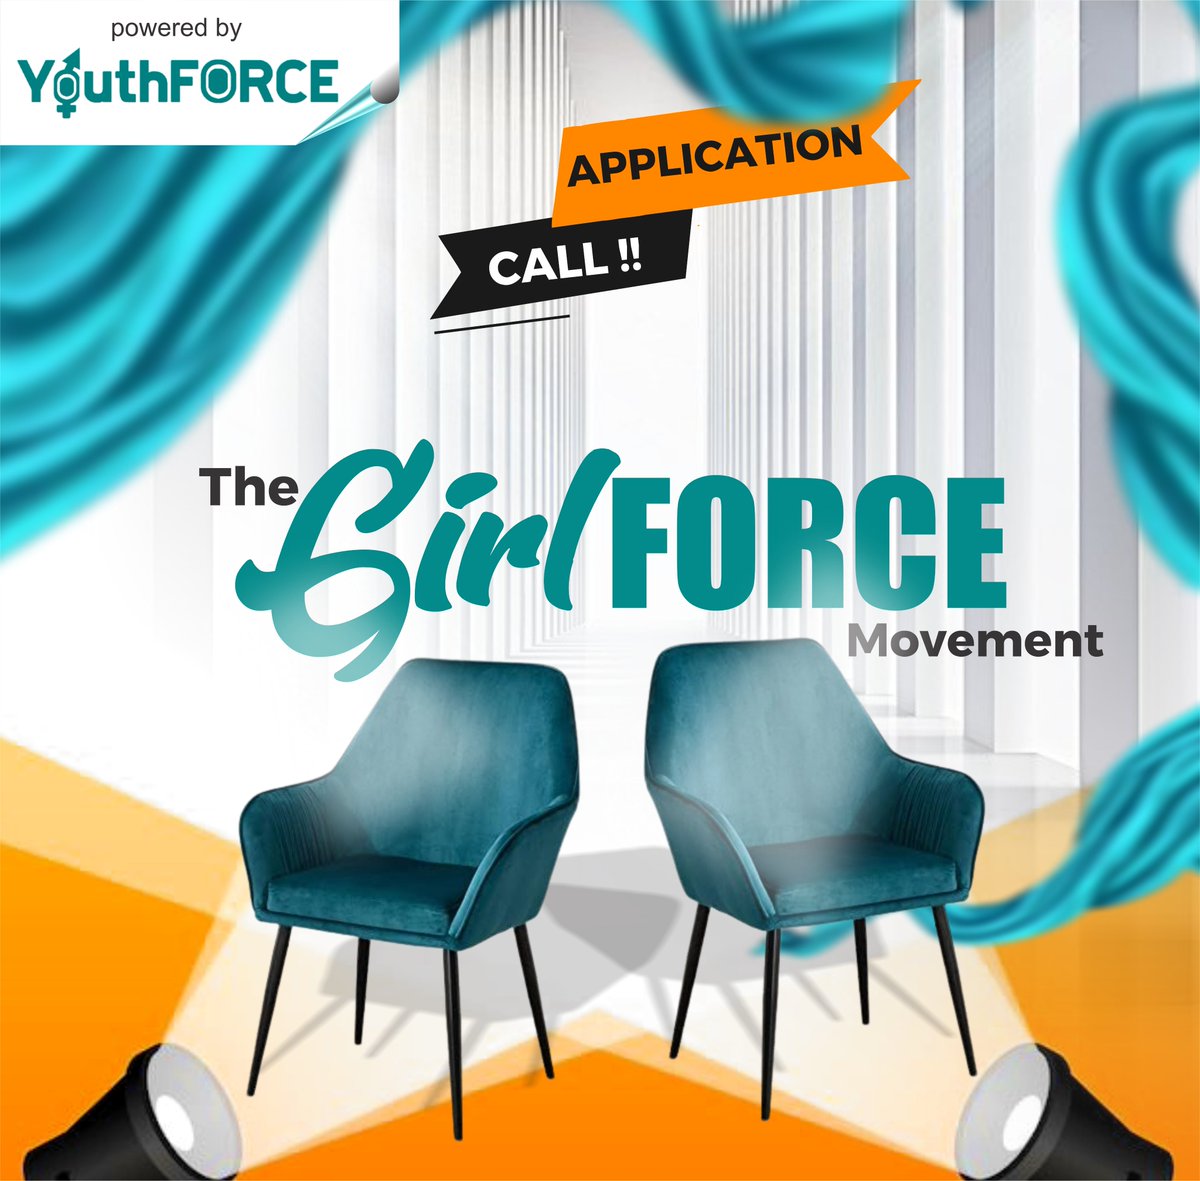 GirlFORCE aims to advocate for social justice and invites members to participate in advocacy campaigns, attend events and engage with like-minded individuals. Fill out the application form to join the community of dynamic young change makers.
docs.google.com/forms/d/1LBQOz…